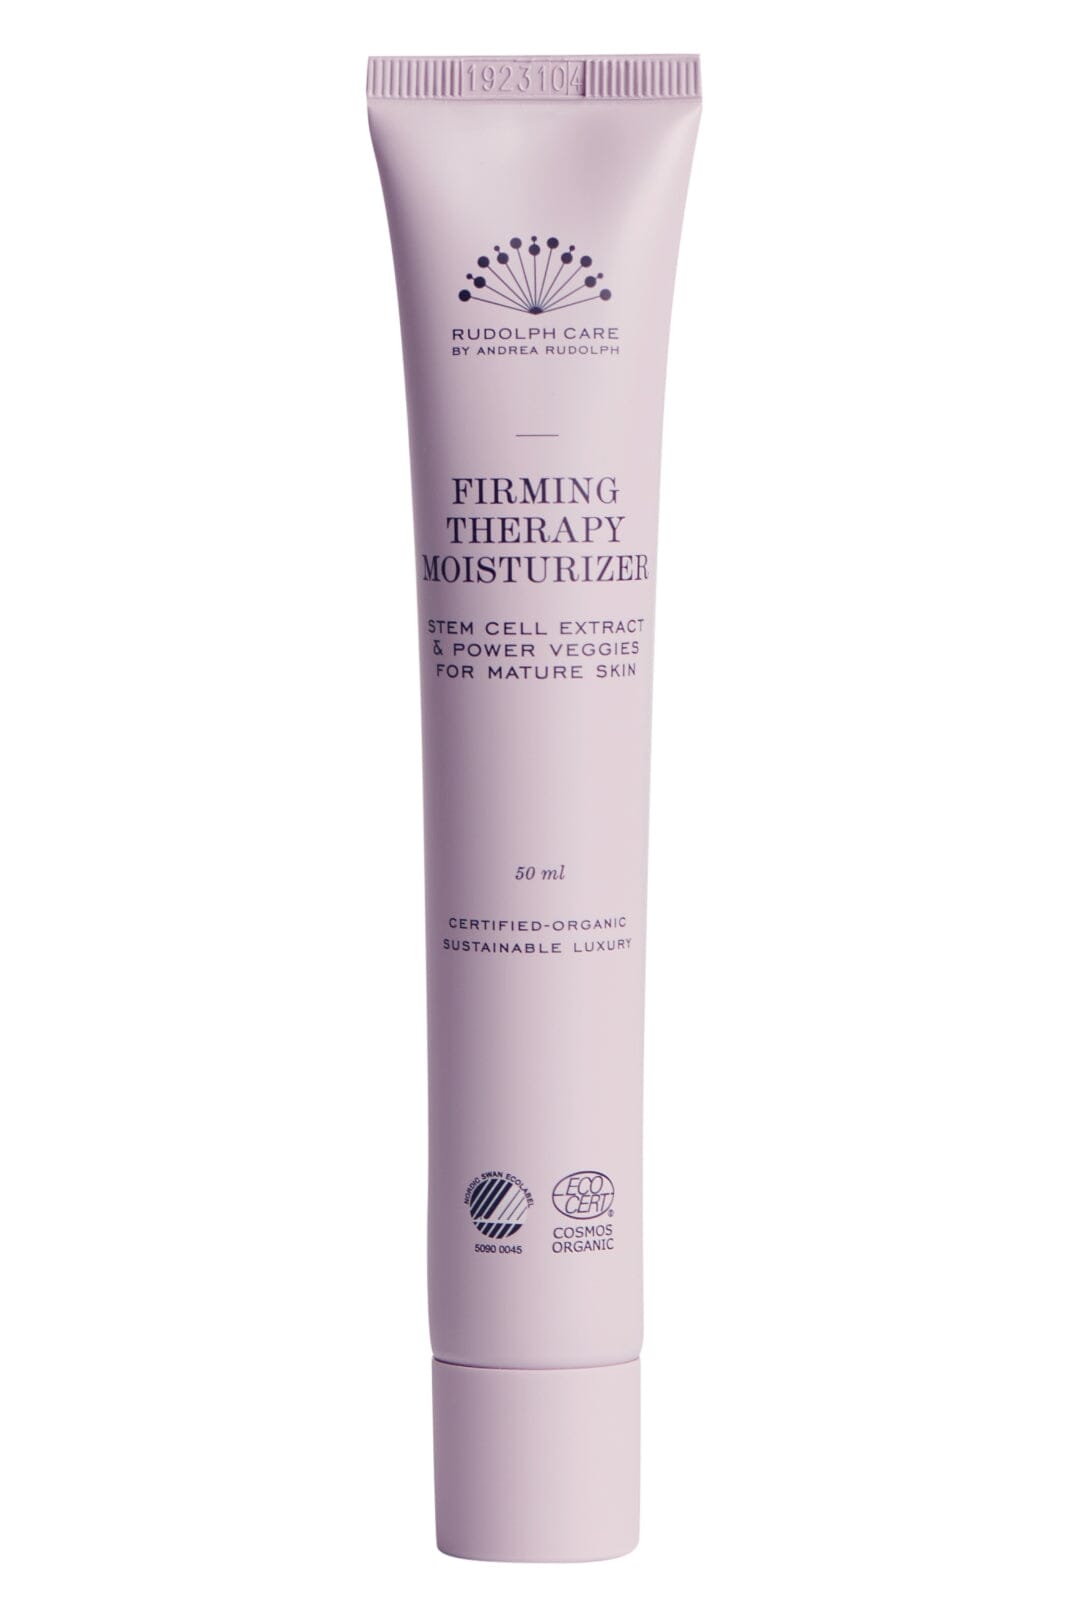 Rudolph Care - Firming Therapy Moisturizer Creme 